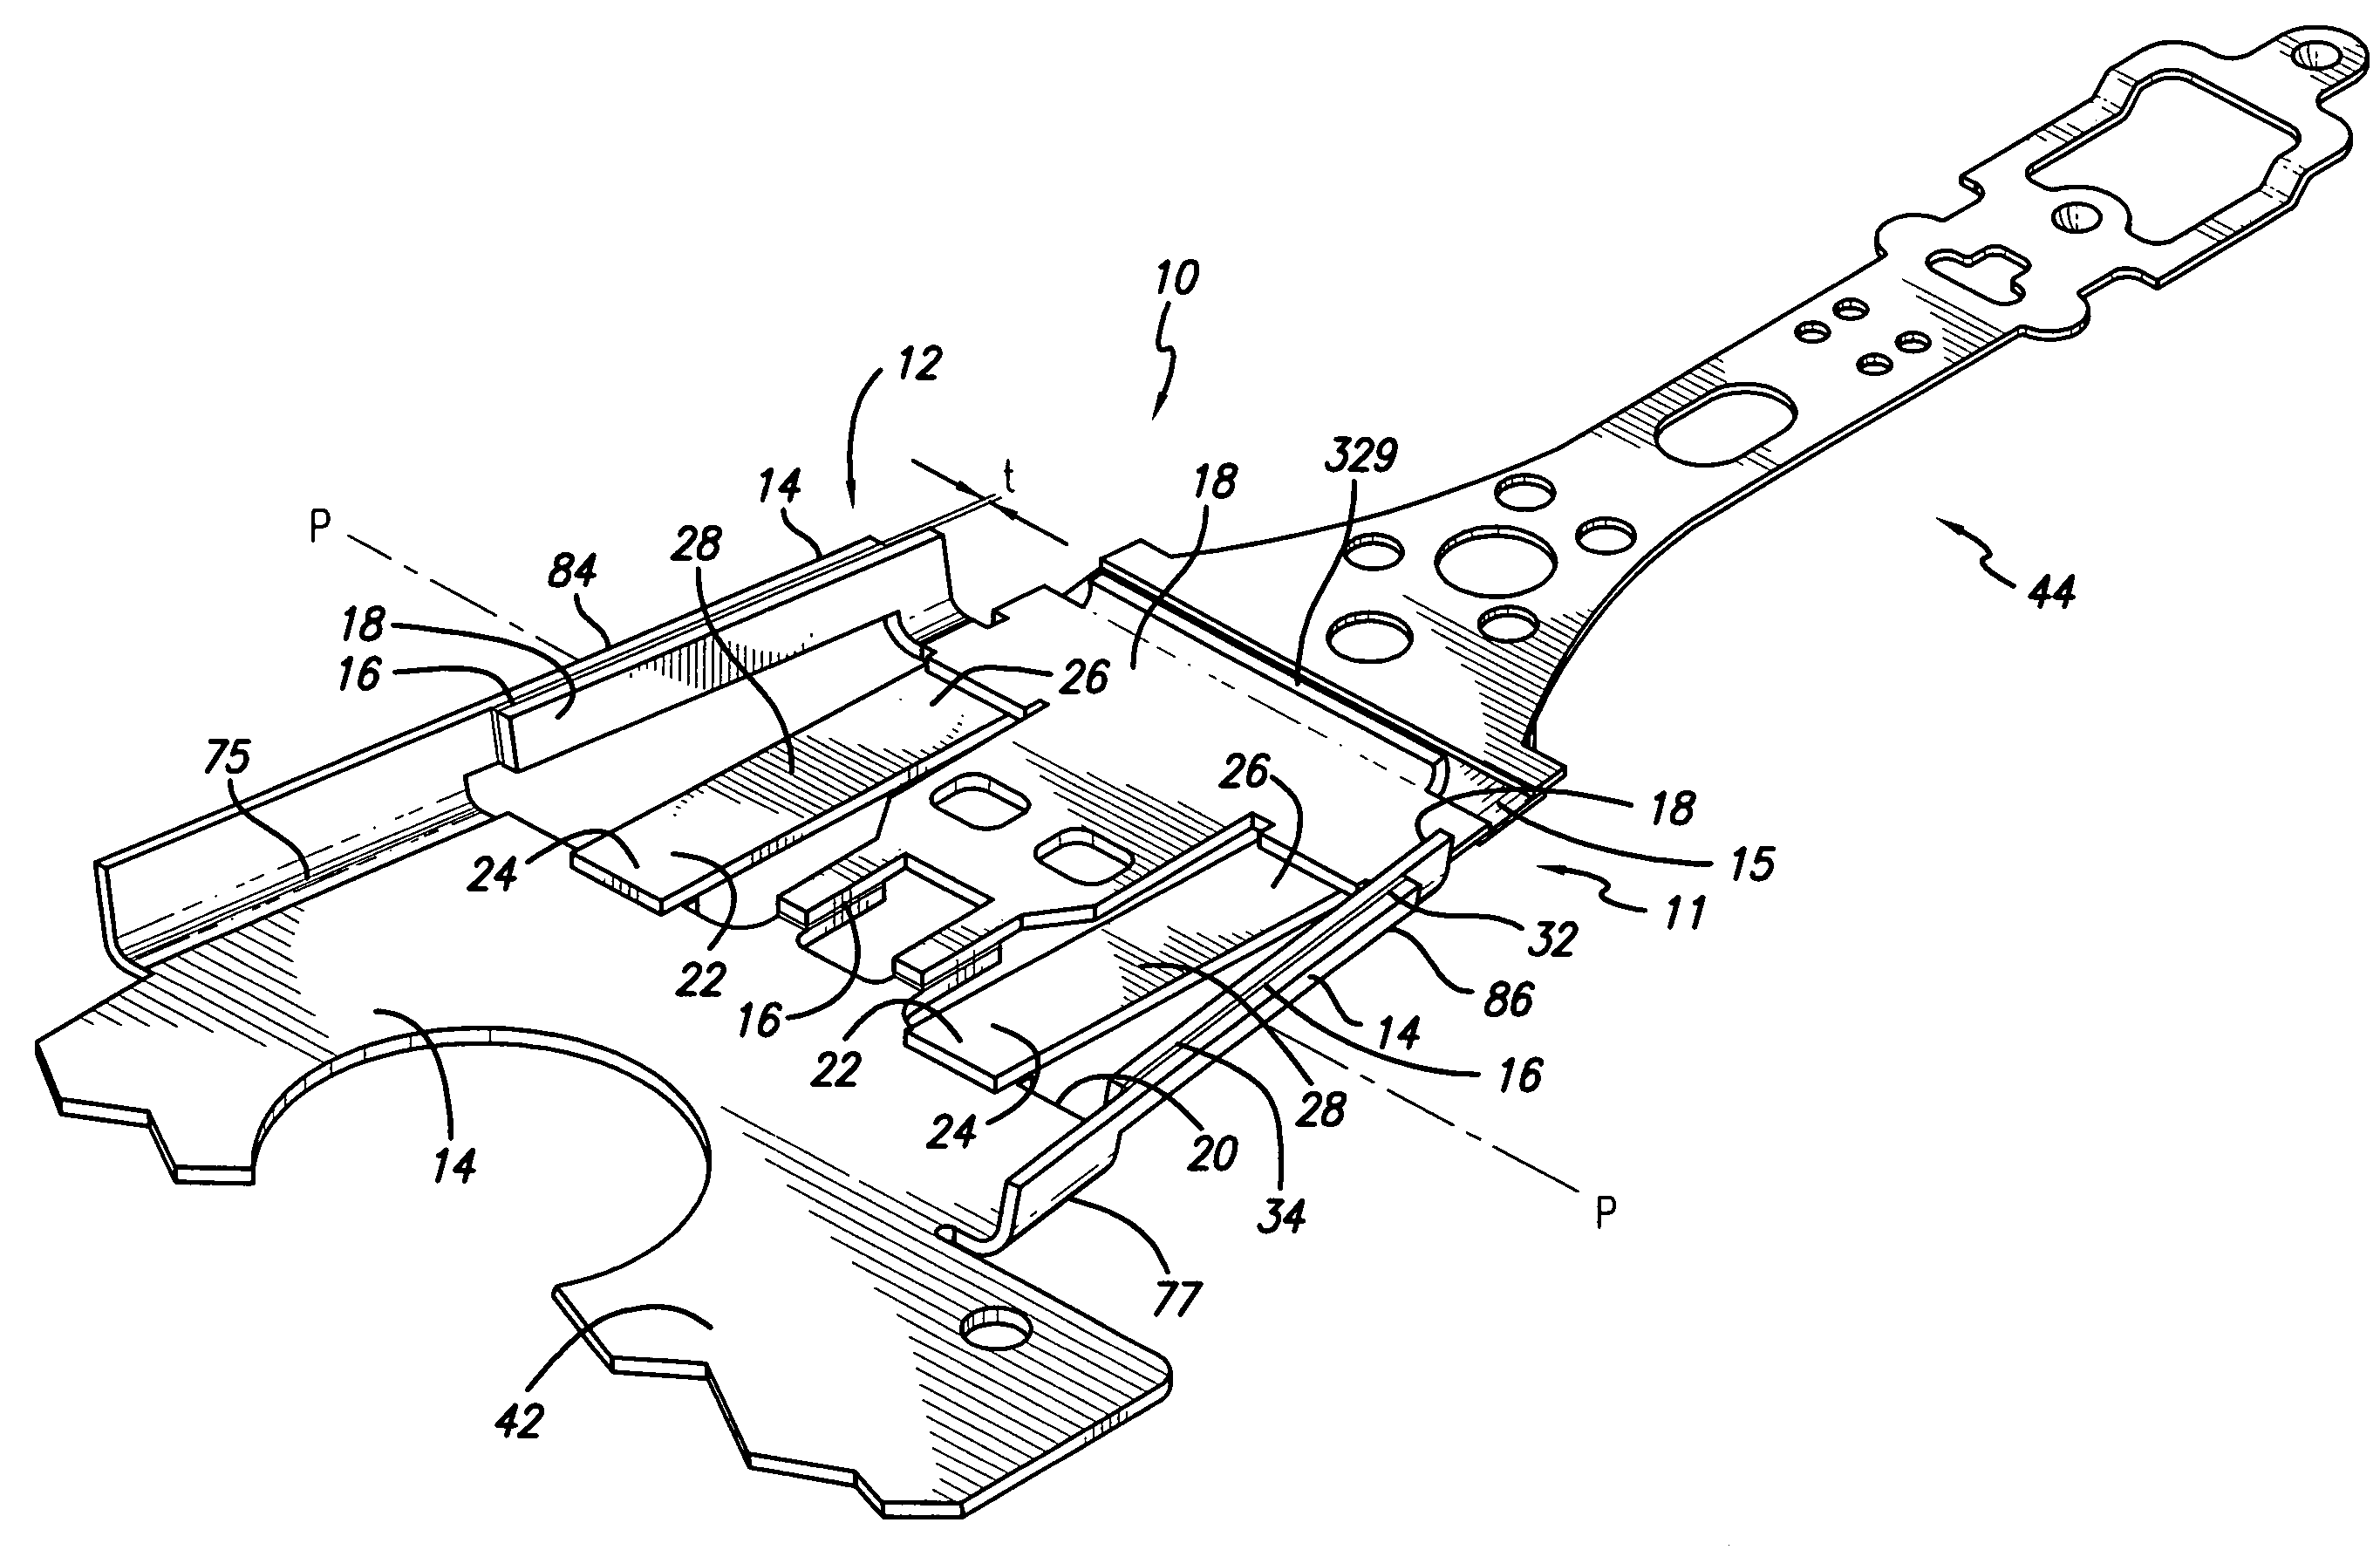 Microactuated suspension with shear transmission of force